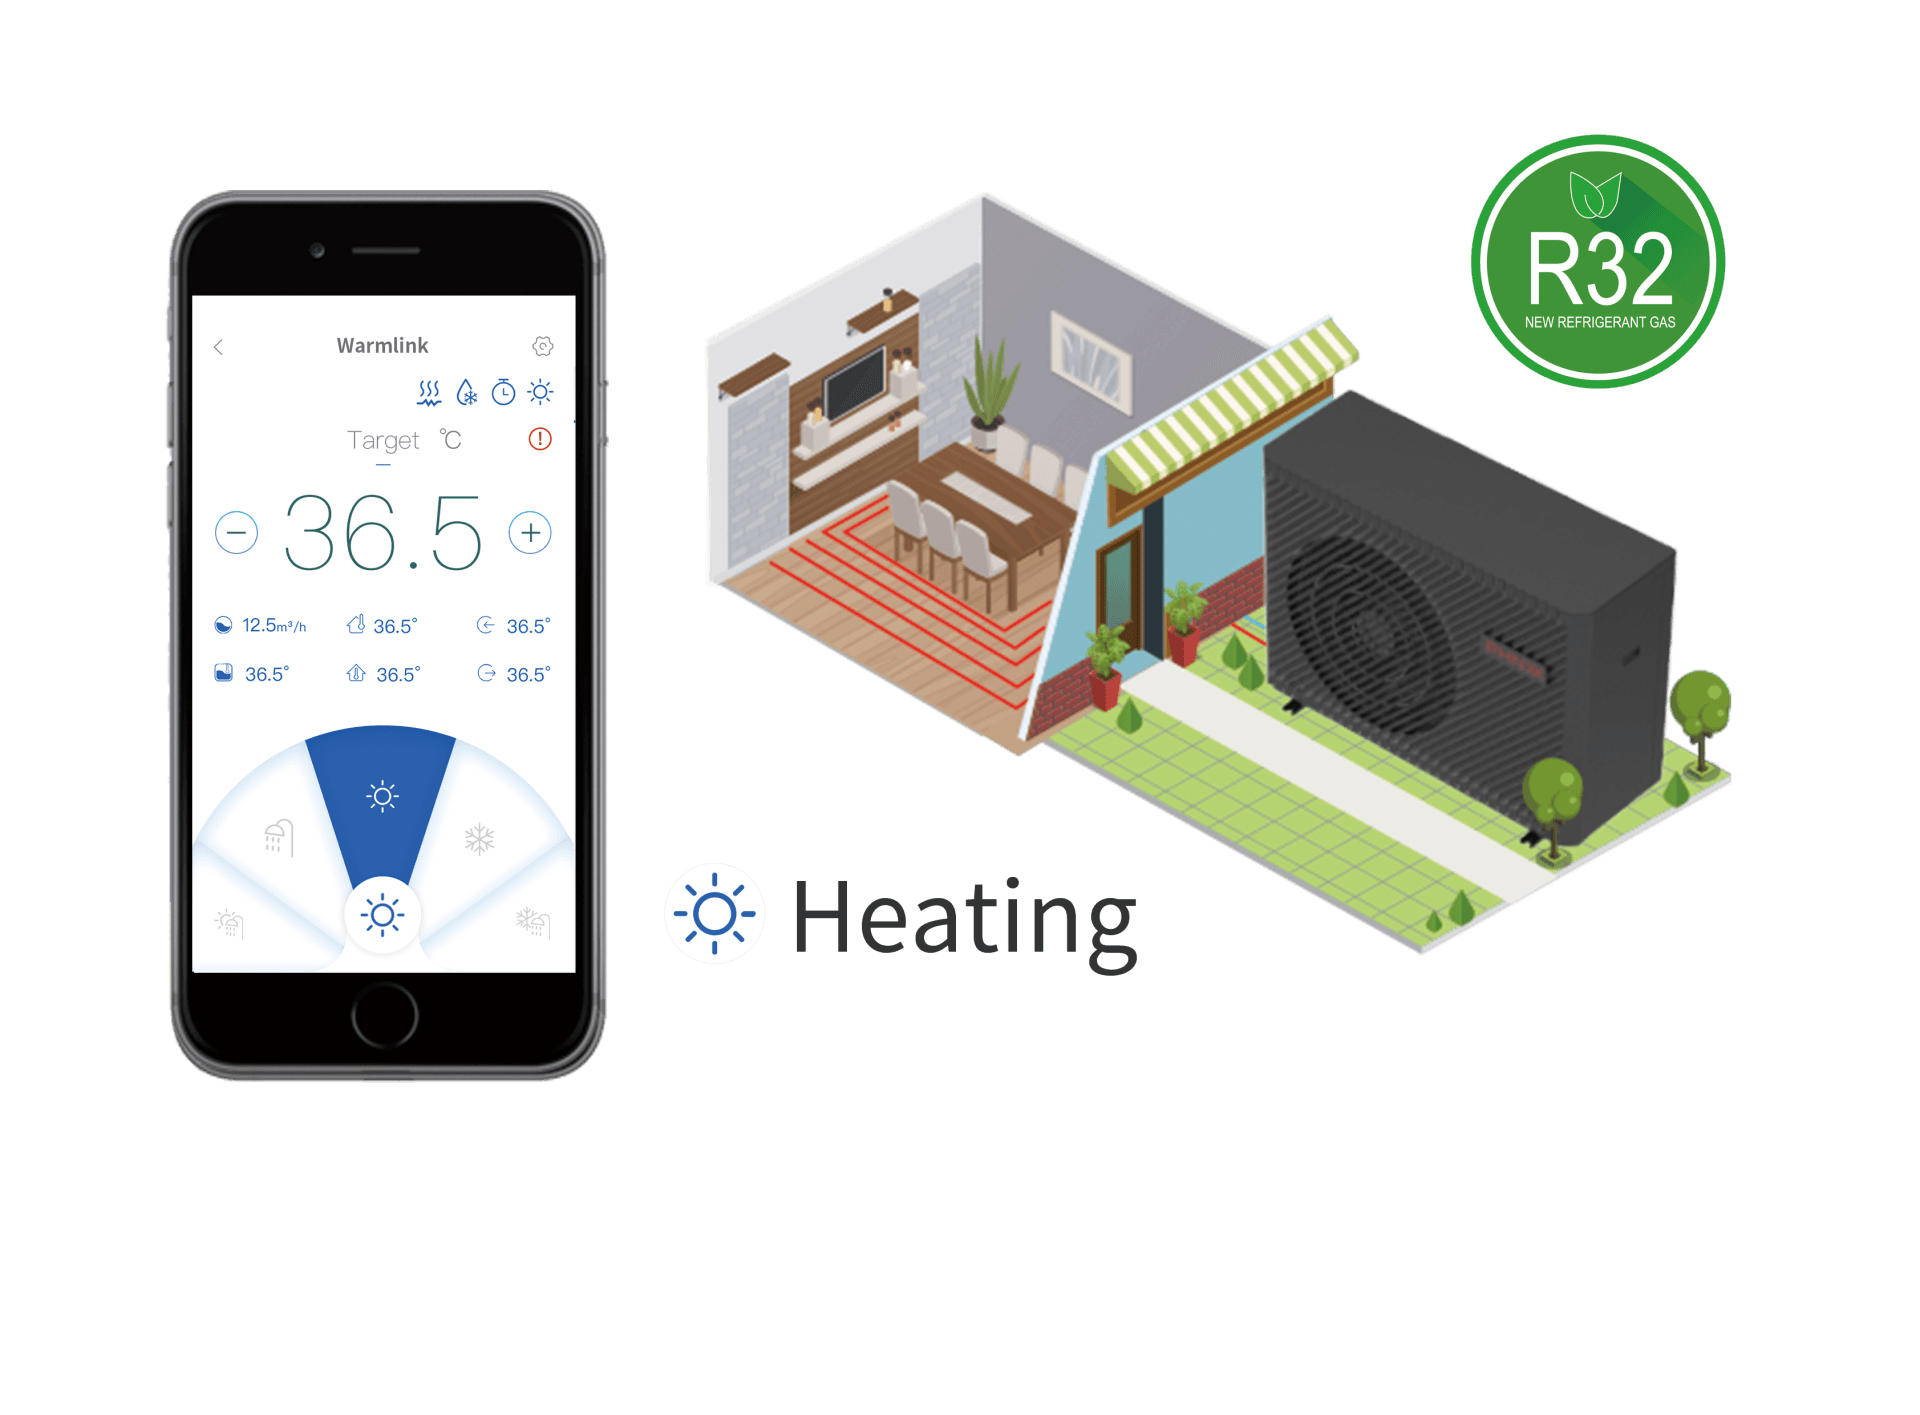 Heat Pump controlled by mobile devices